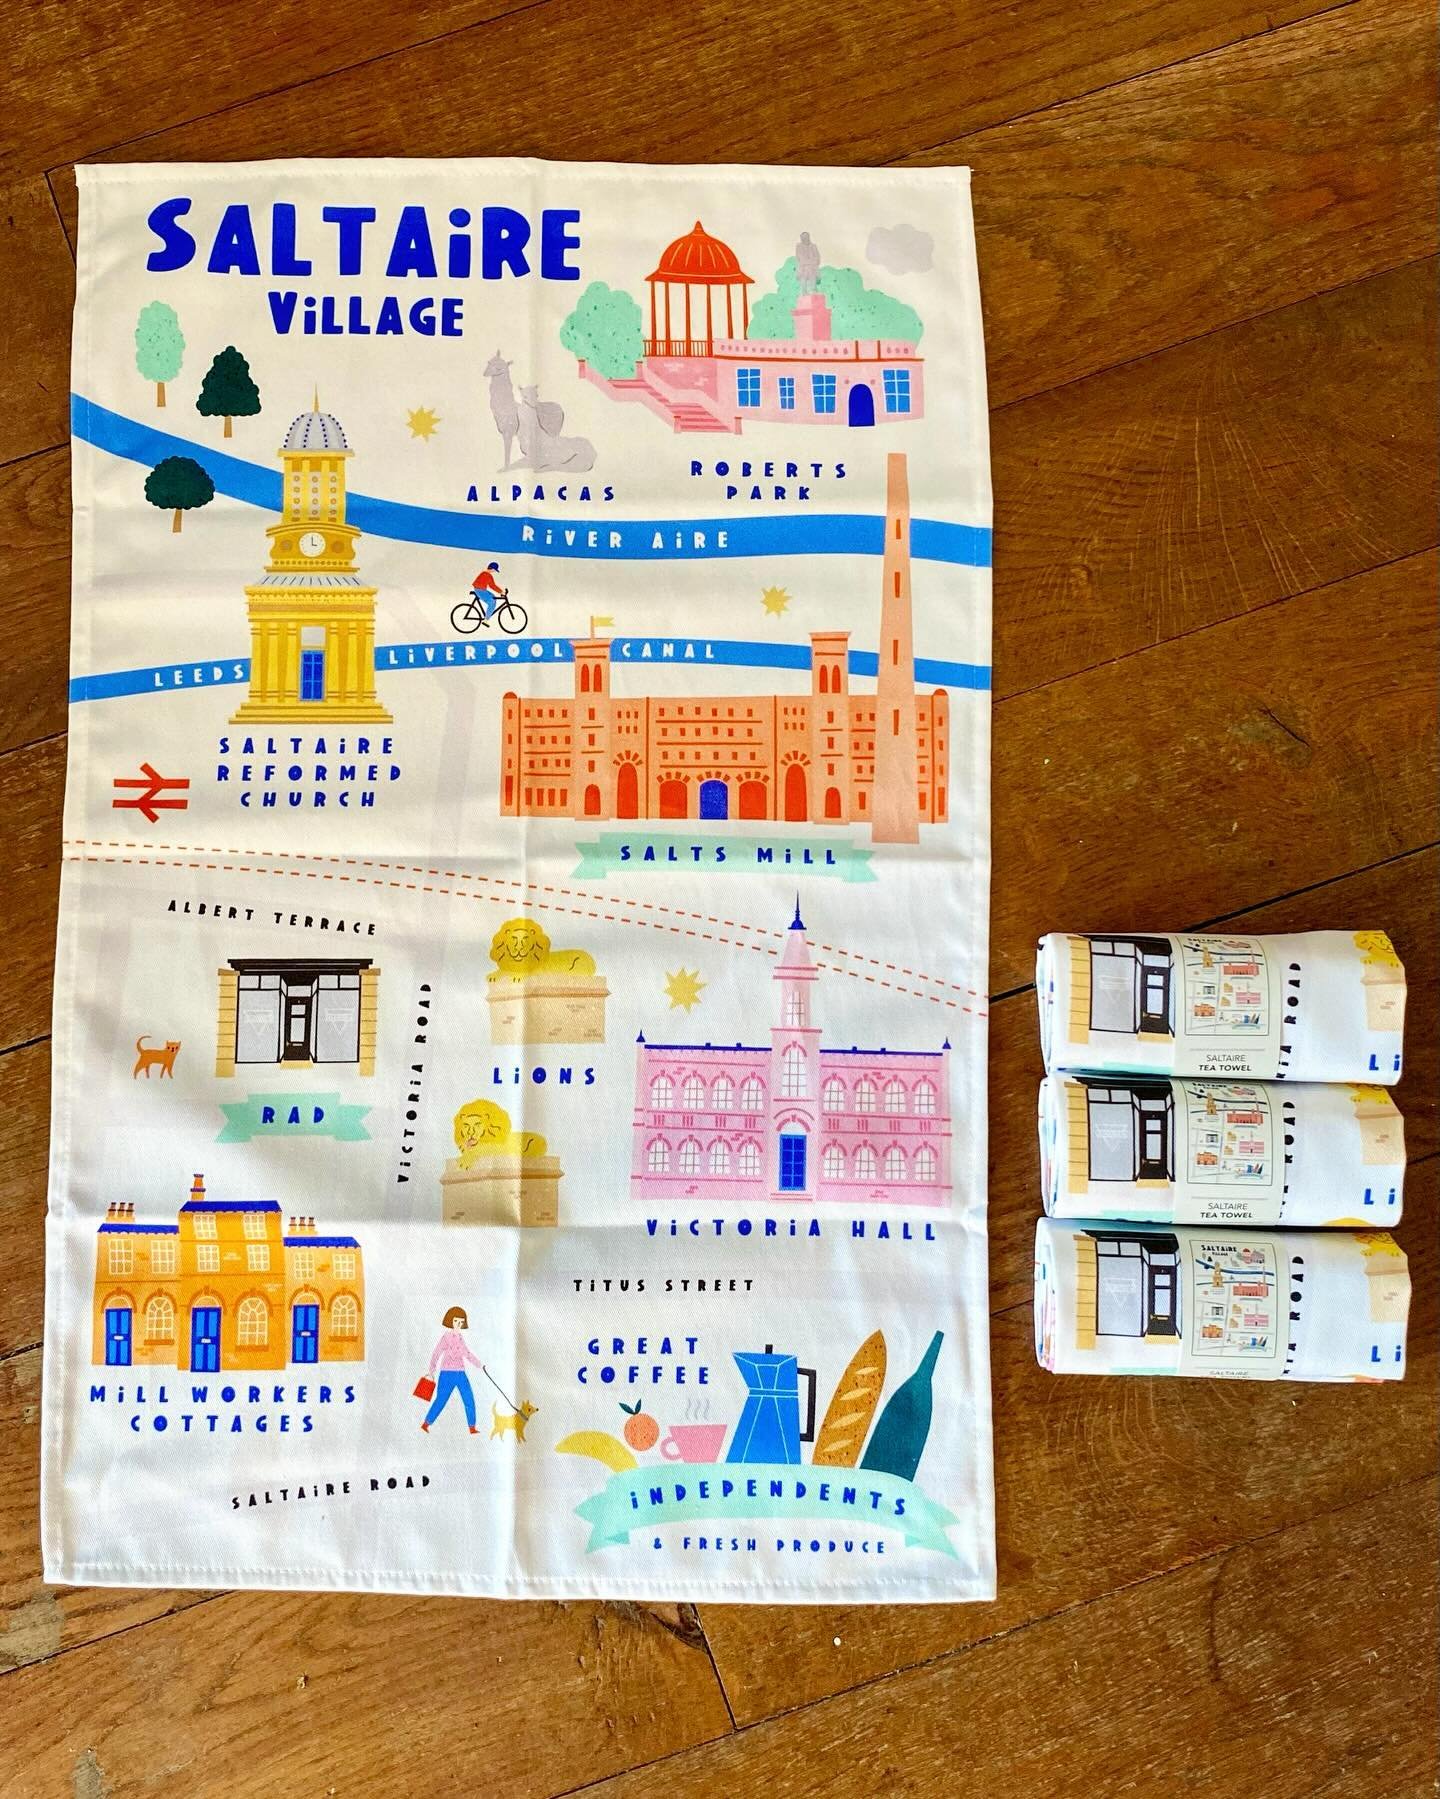 Super pleased to share our new Saltaire tea towel with you all! Designed by wonderful local creative and long time RAD friend @lemonandsugarprints 💖 WE LOVE IT 😍